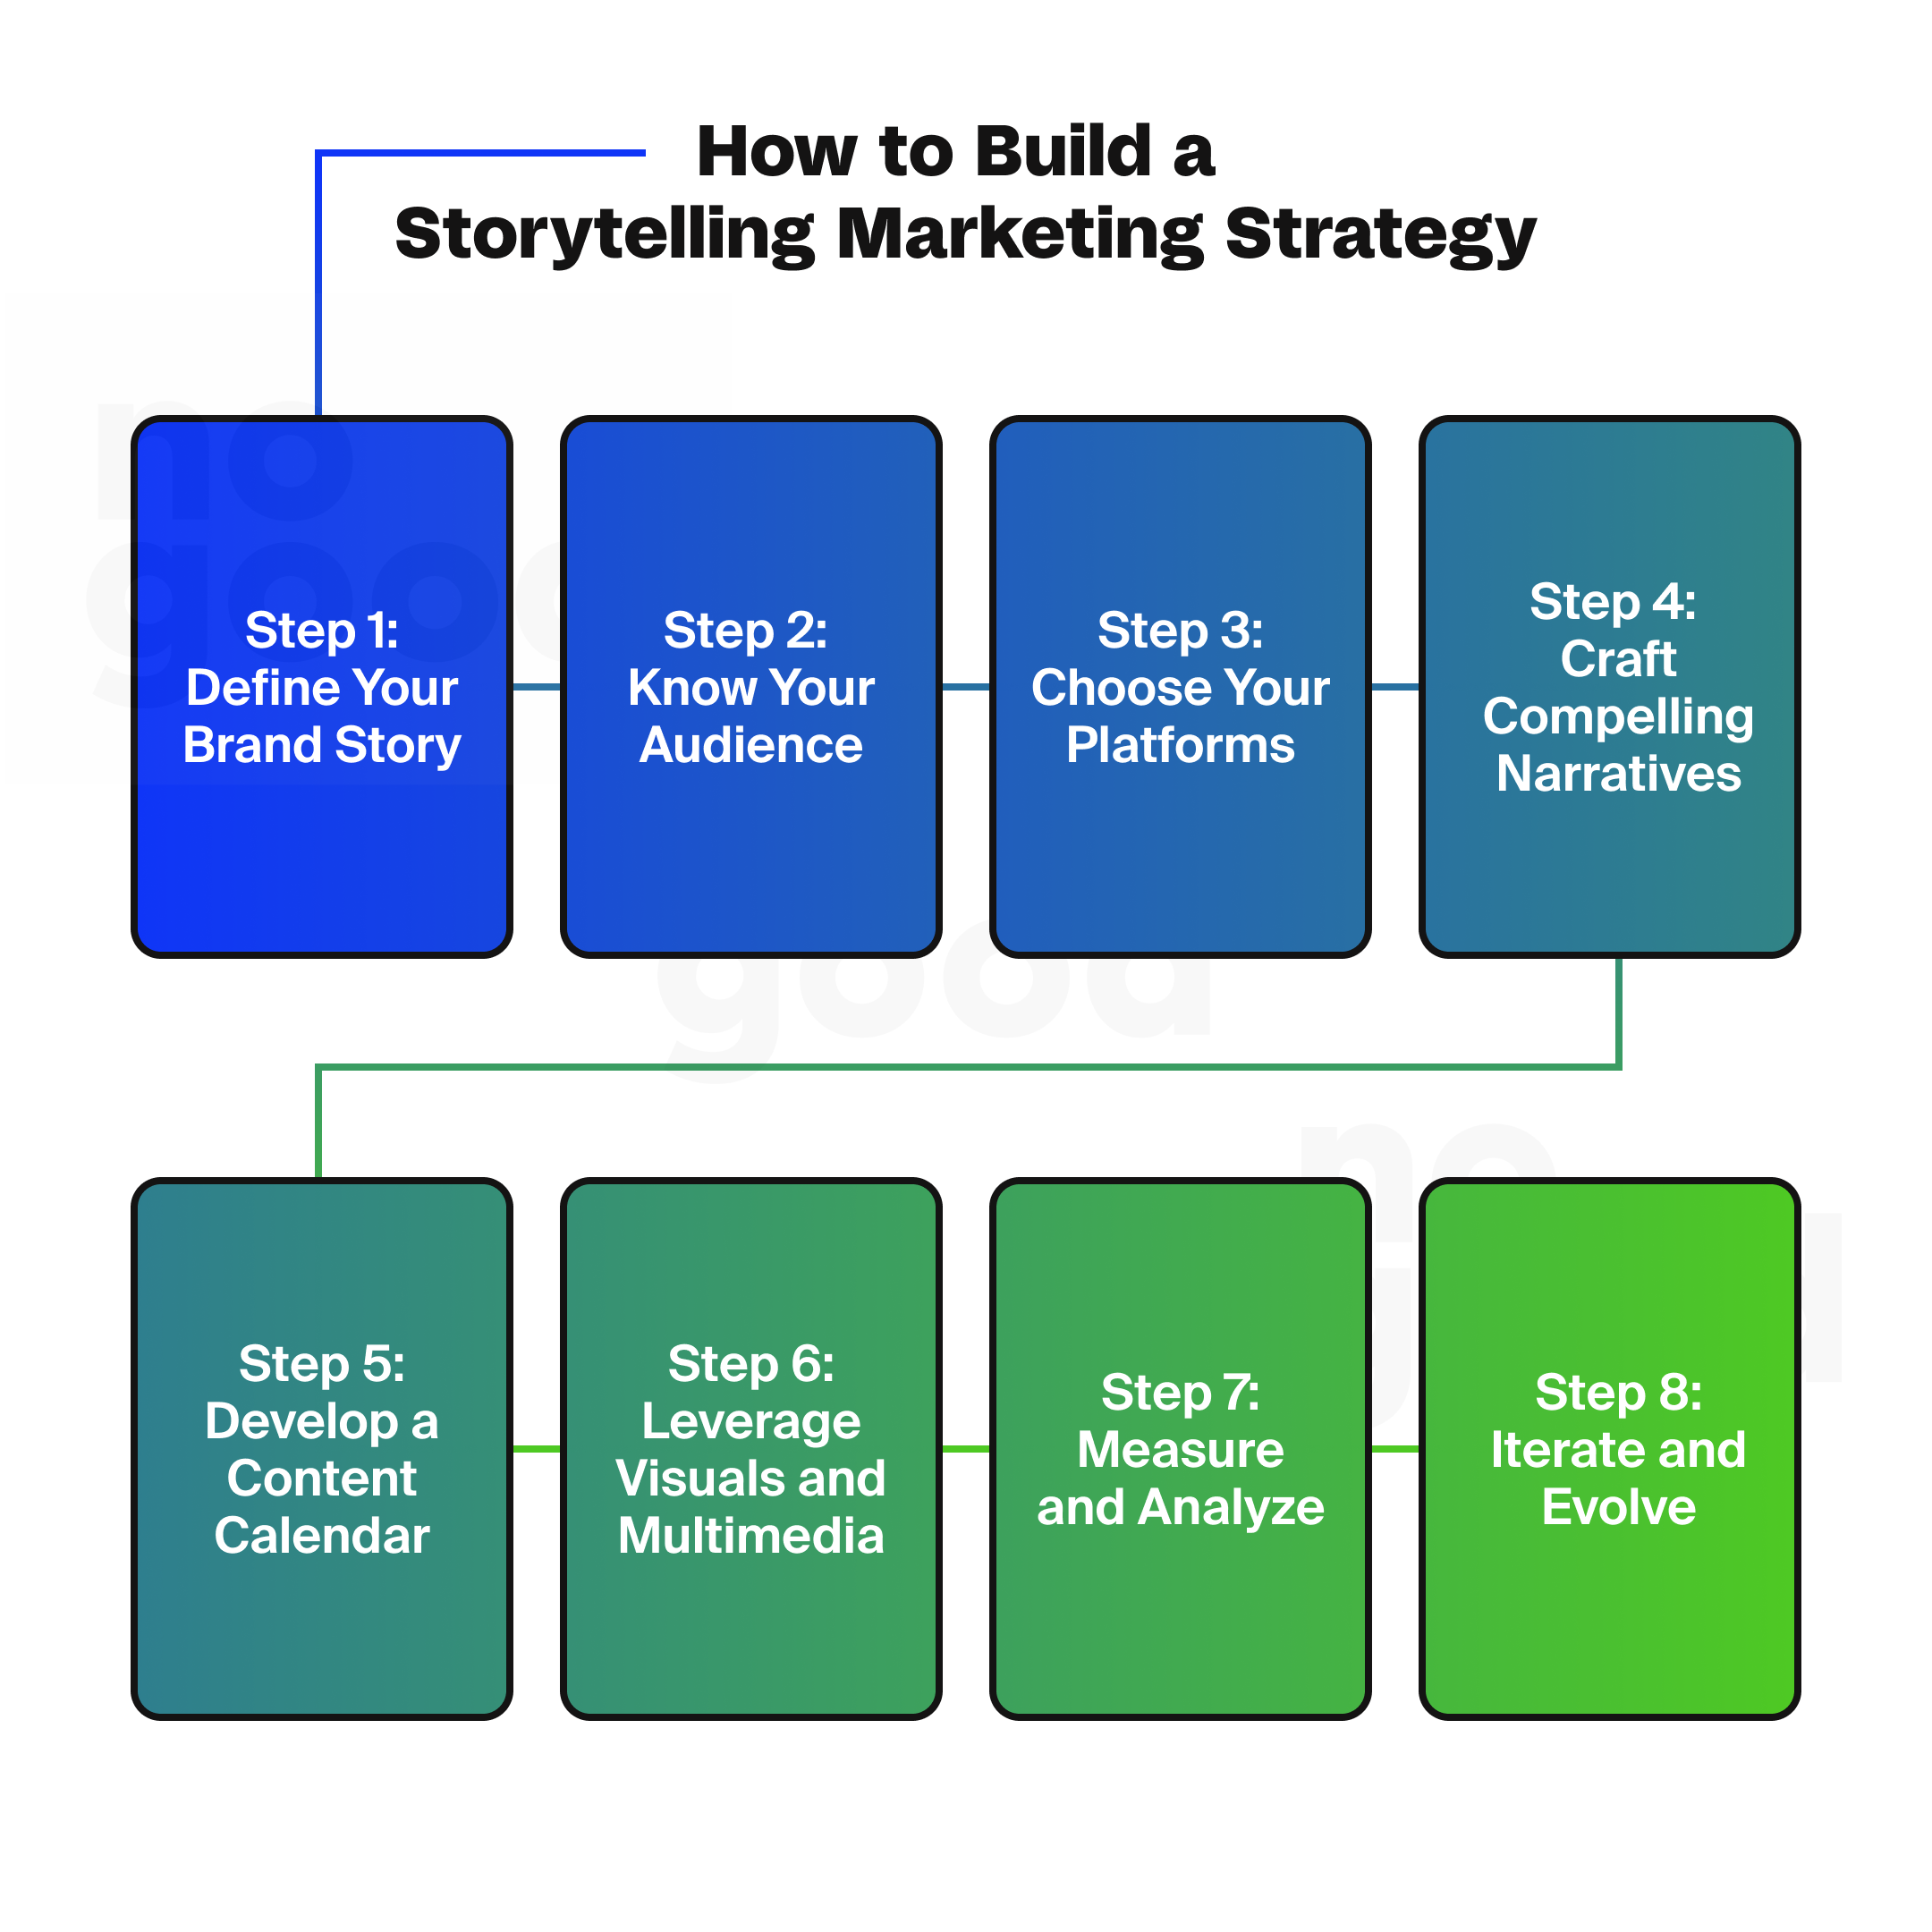 How to build a storytelling marketing strategy